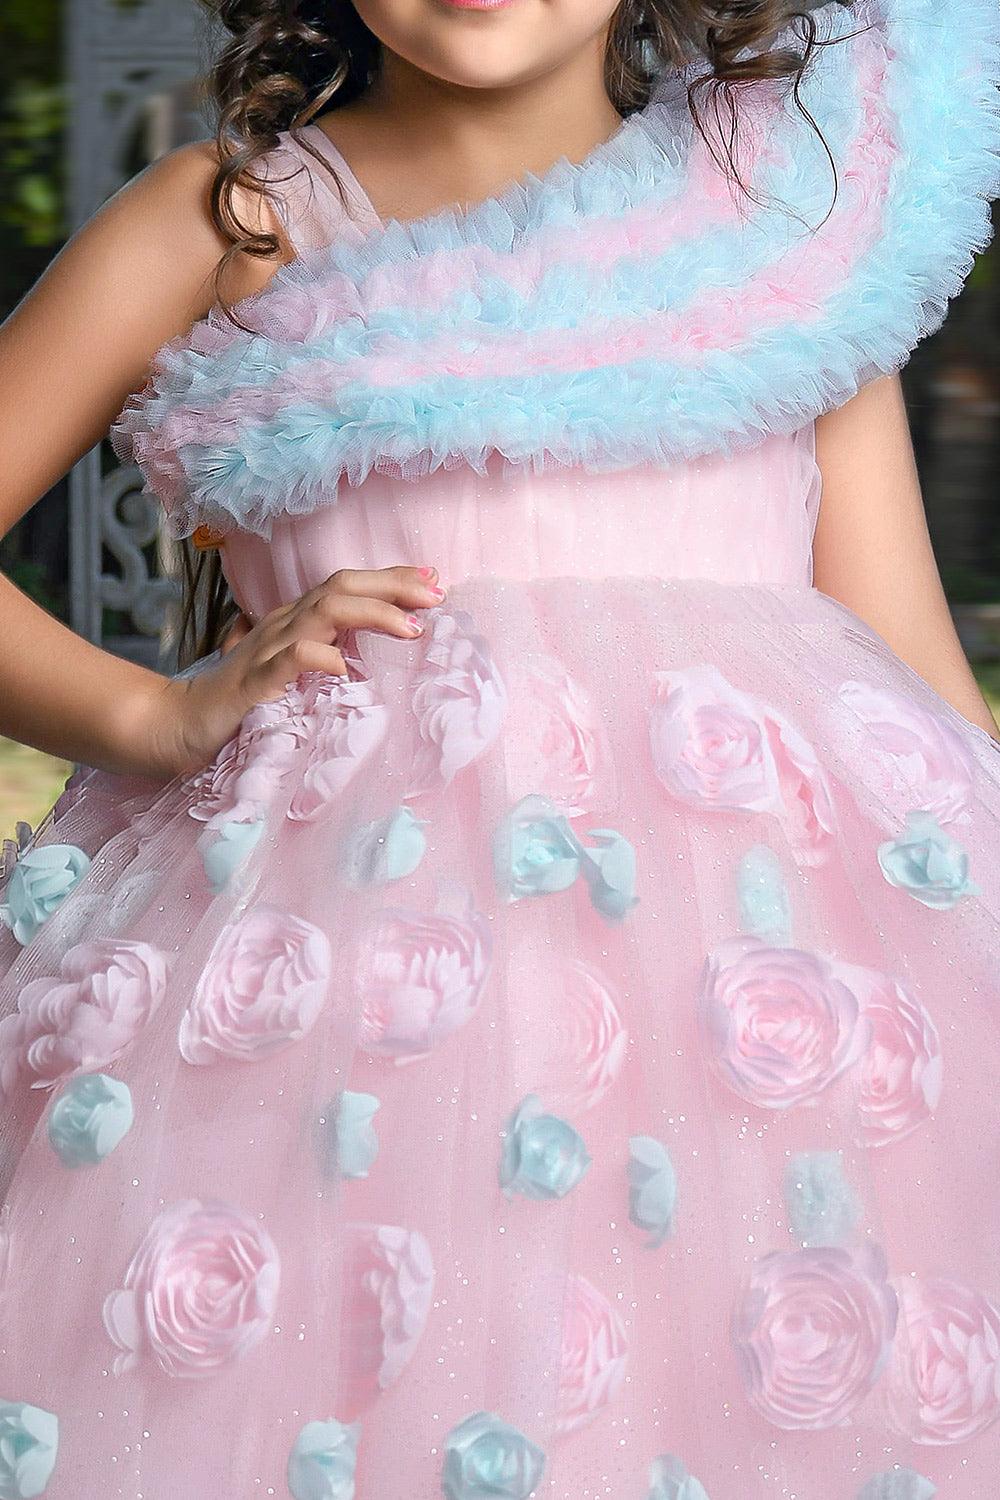 Flower Girl Dresses For Baby Girls Ball Gown Style With Bow Detail, Perfect  For Birthdays, Princess Parties, And 1 Year Olds From Fengxiziwu, $17.22 |  DHgate.Com